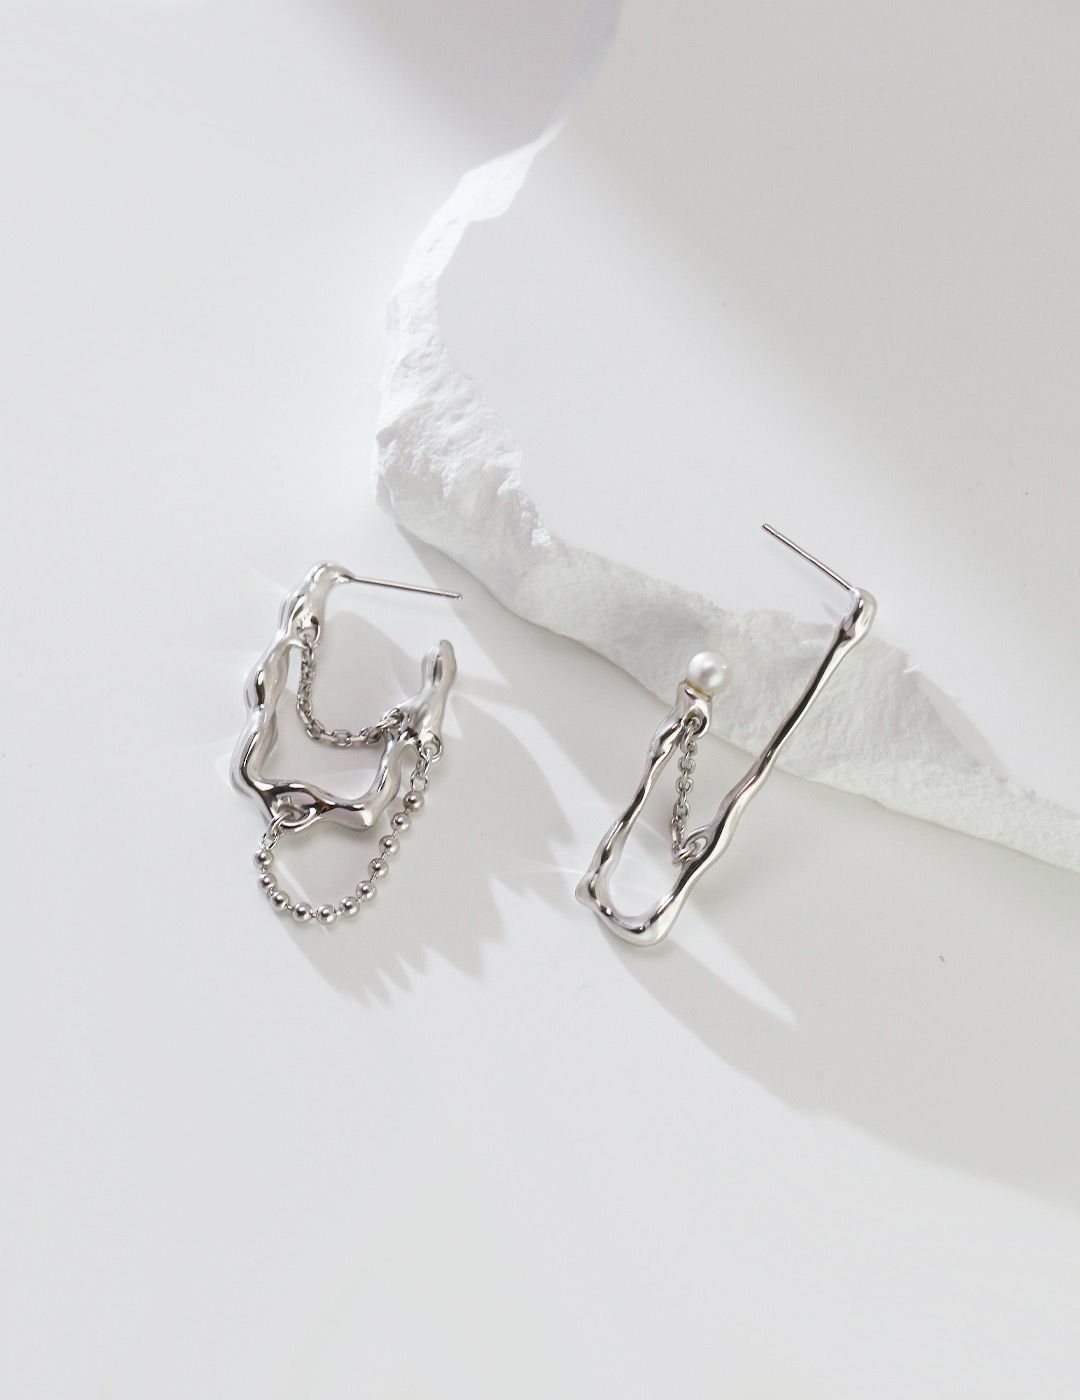 Handmade abstract silver asymmetrical earrings featuring modern and edgy abstract shapes and lines, made with high-quality sterling silver."